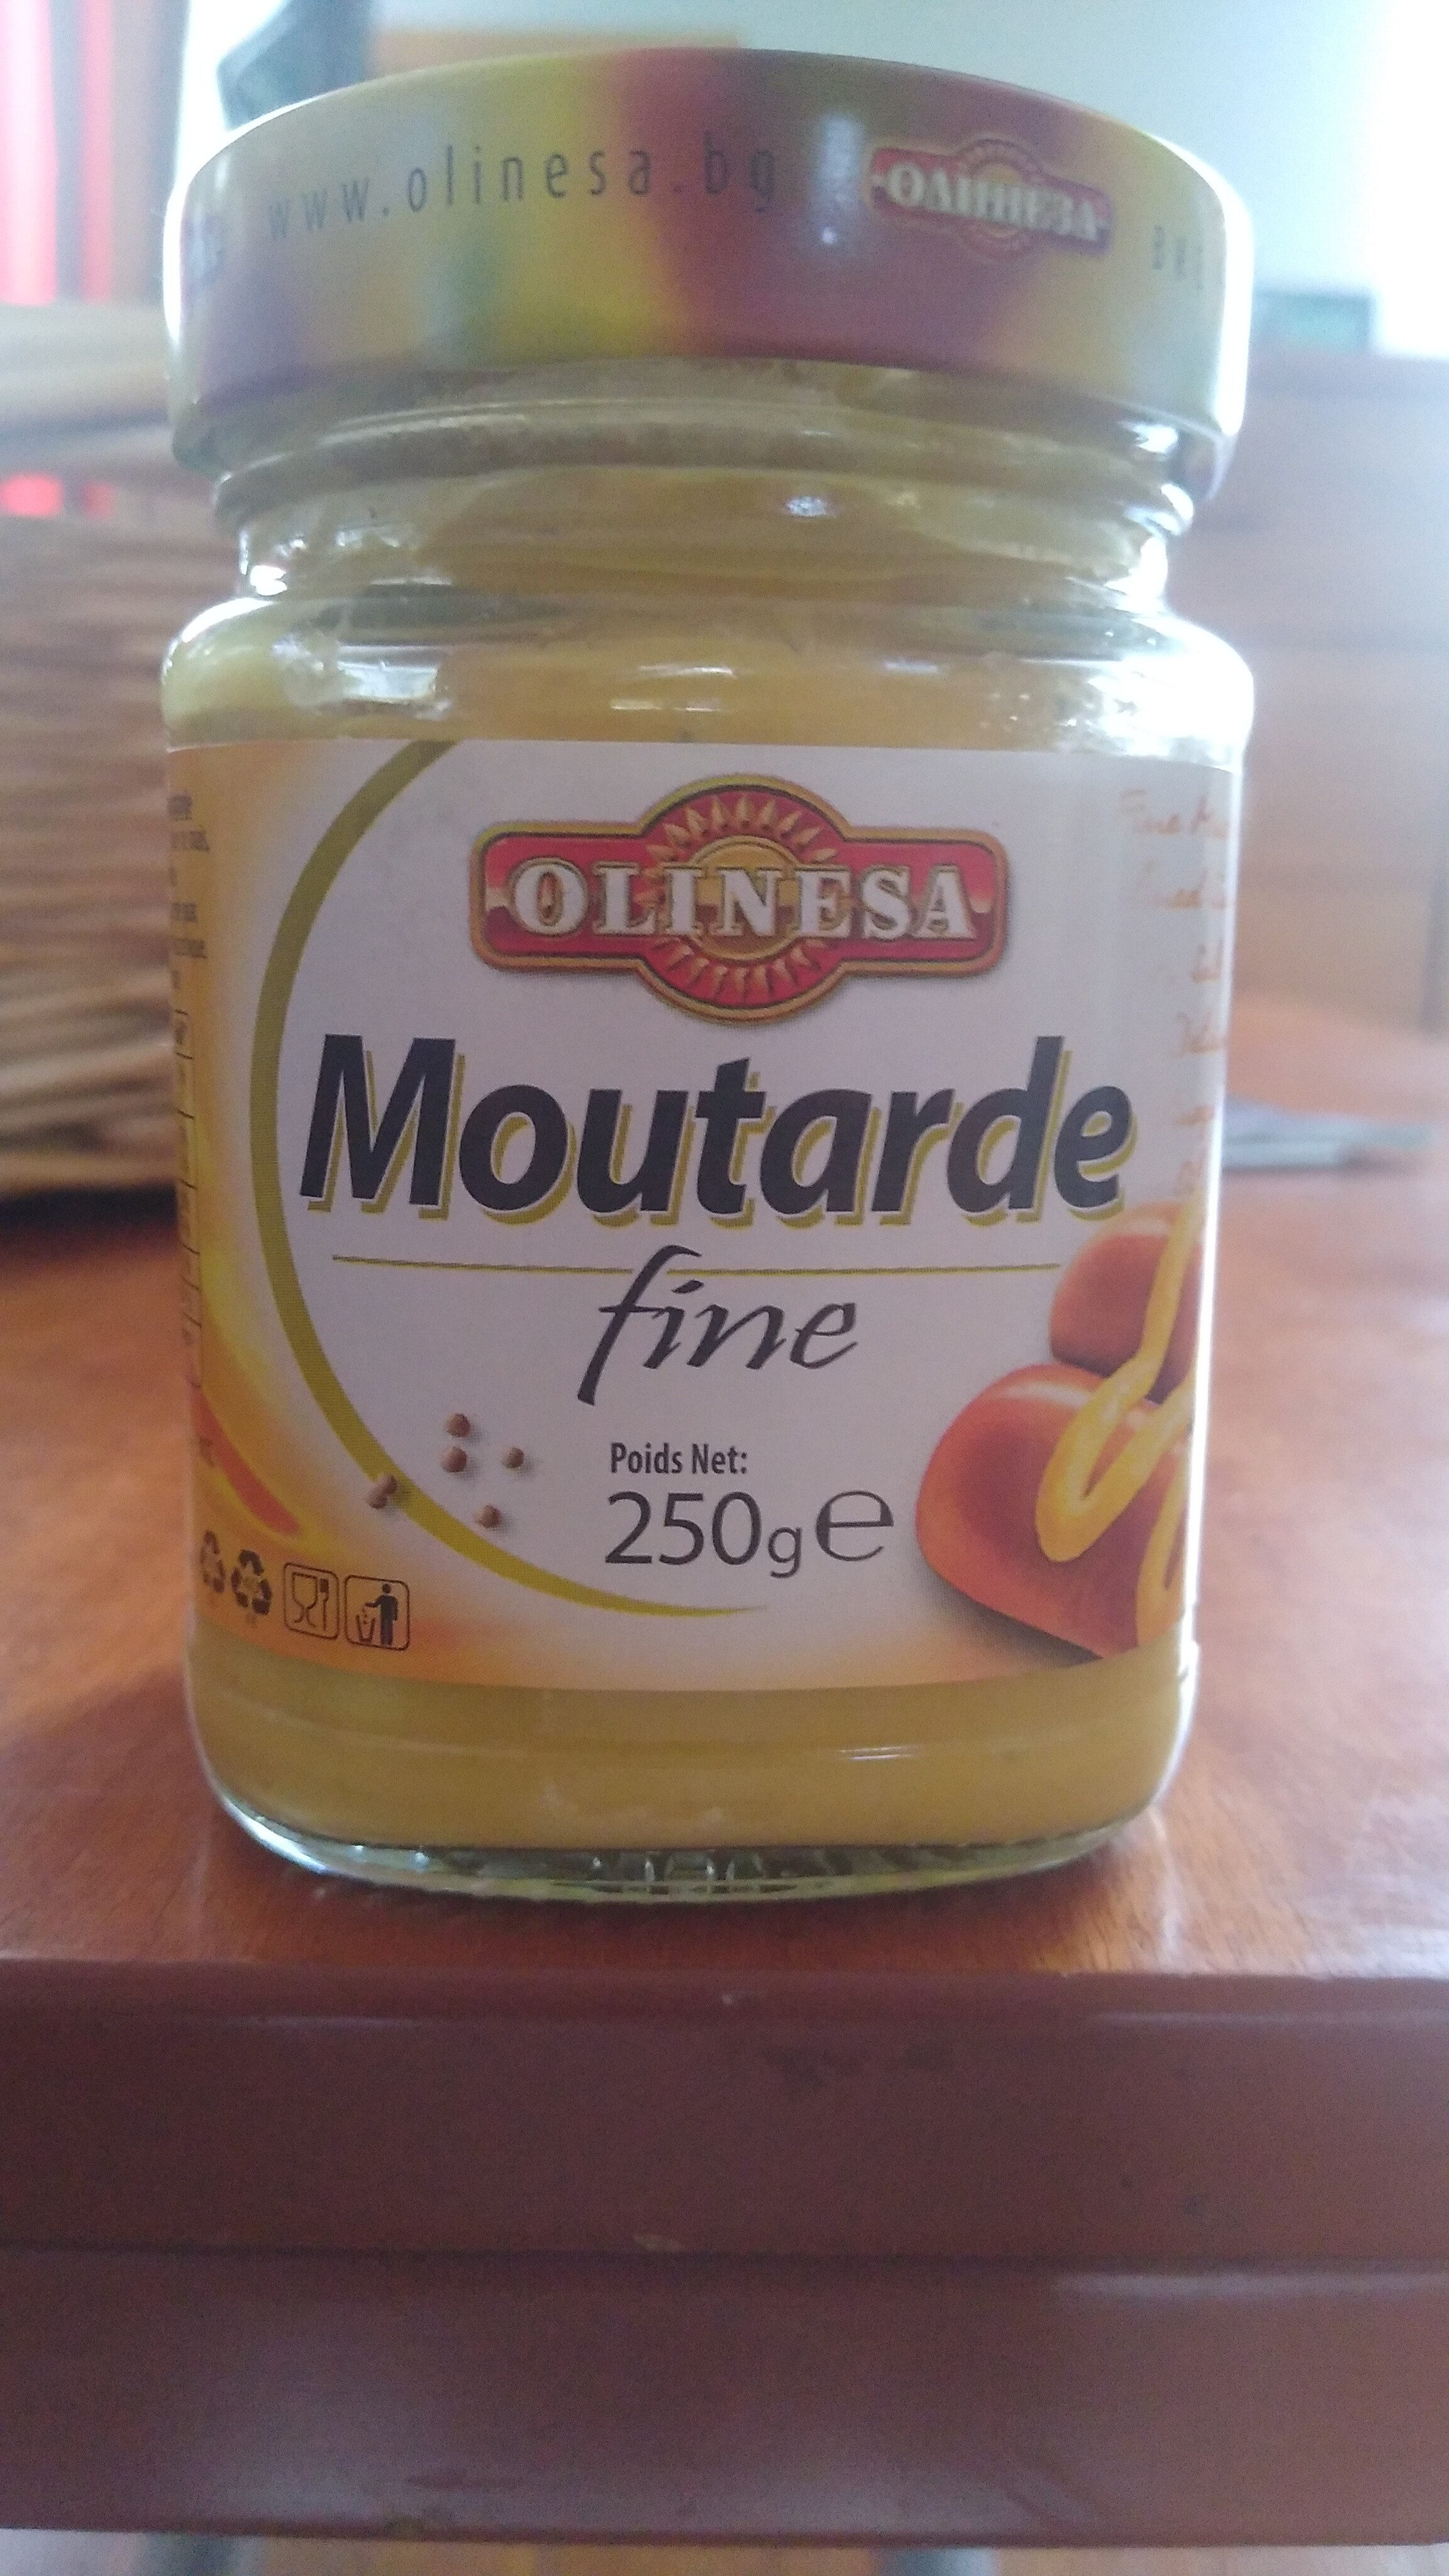 Moutarde fine - Product - fr